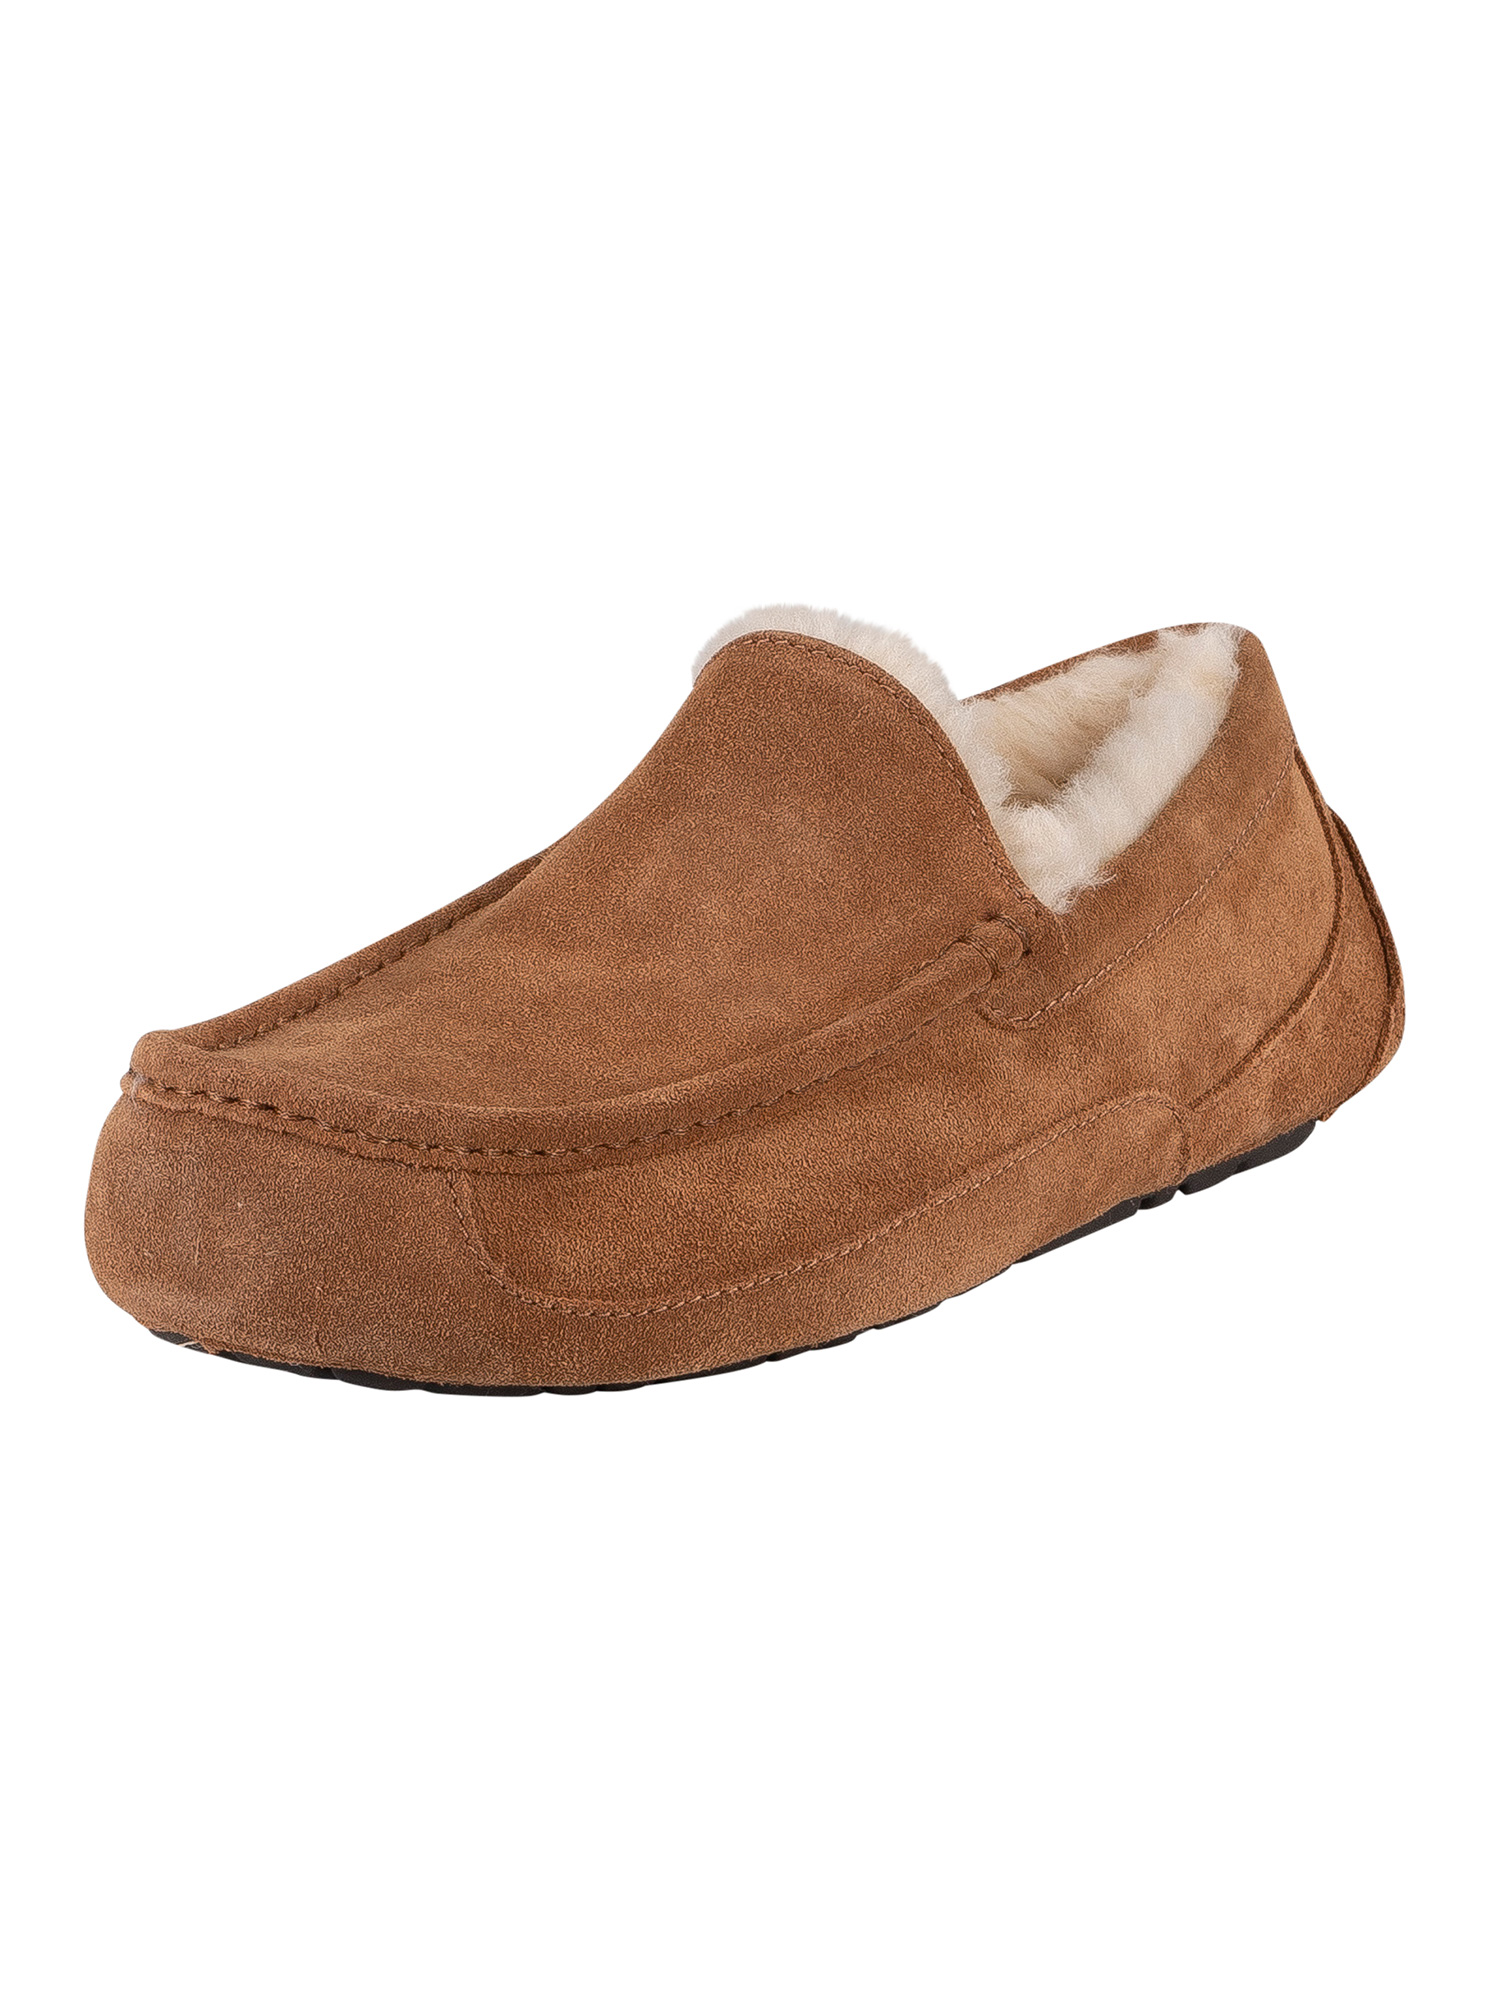 UGG Ascot Suede Slippers - Chestnut | Standout